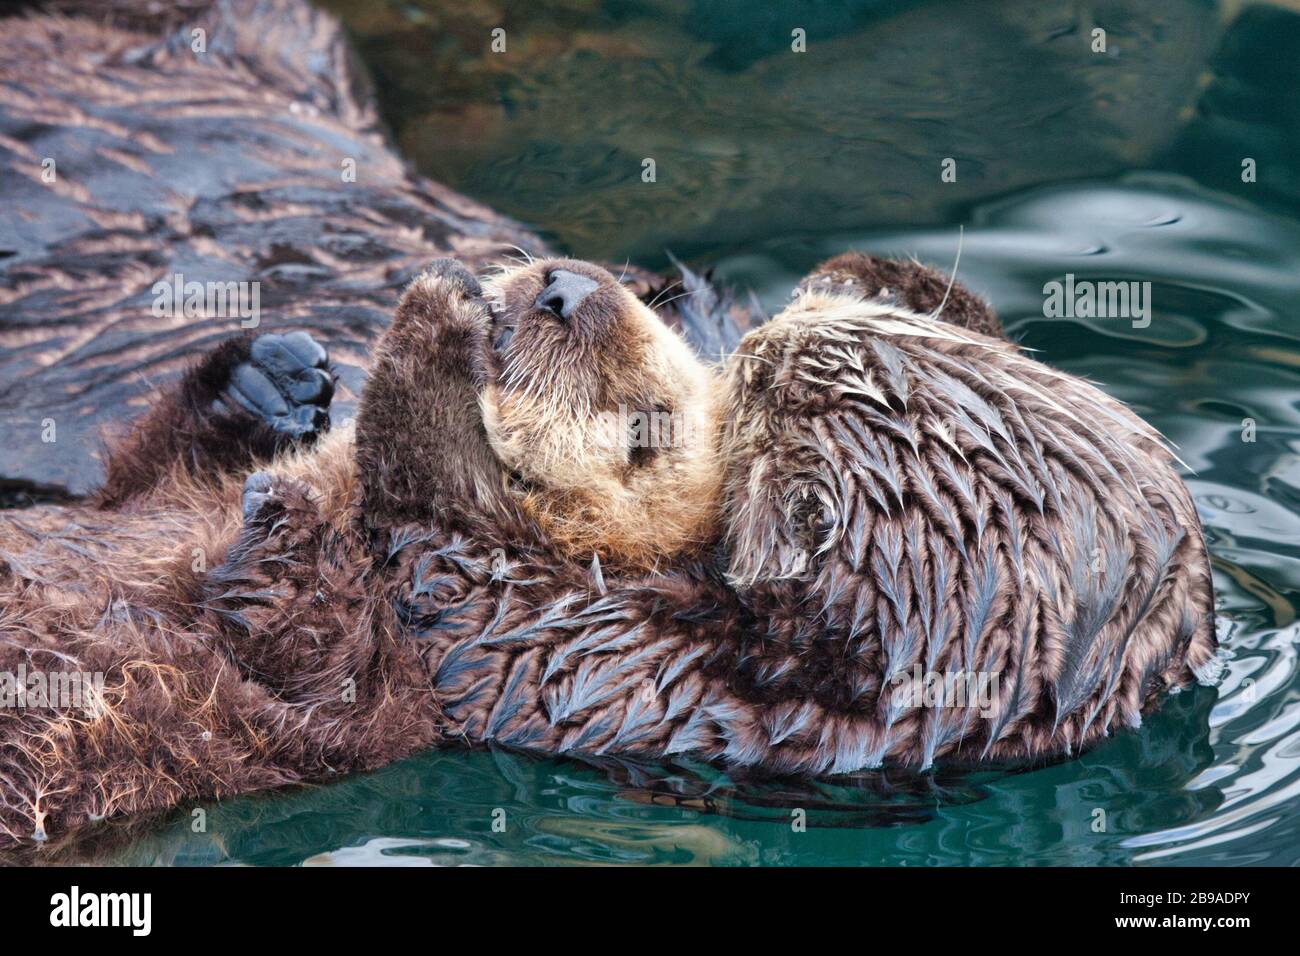 Close-up photo of a mother sea otter nurturing her recently born baby. Stock Photo